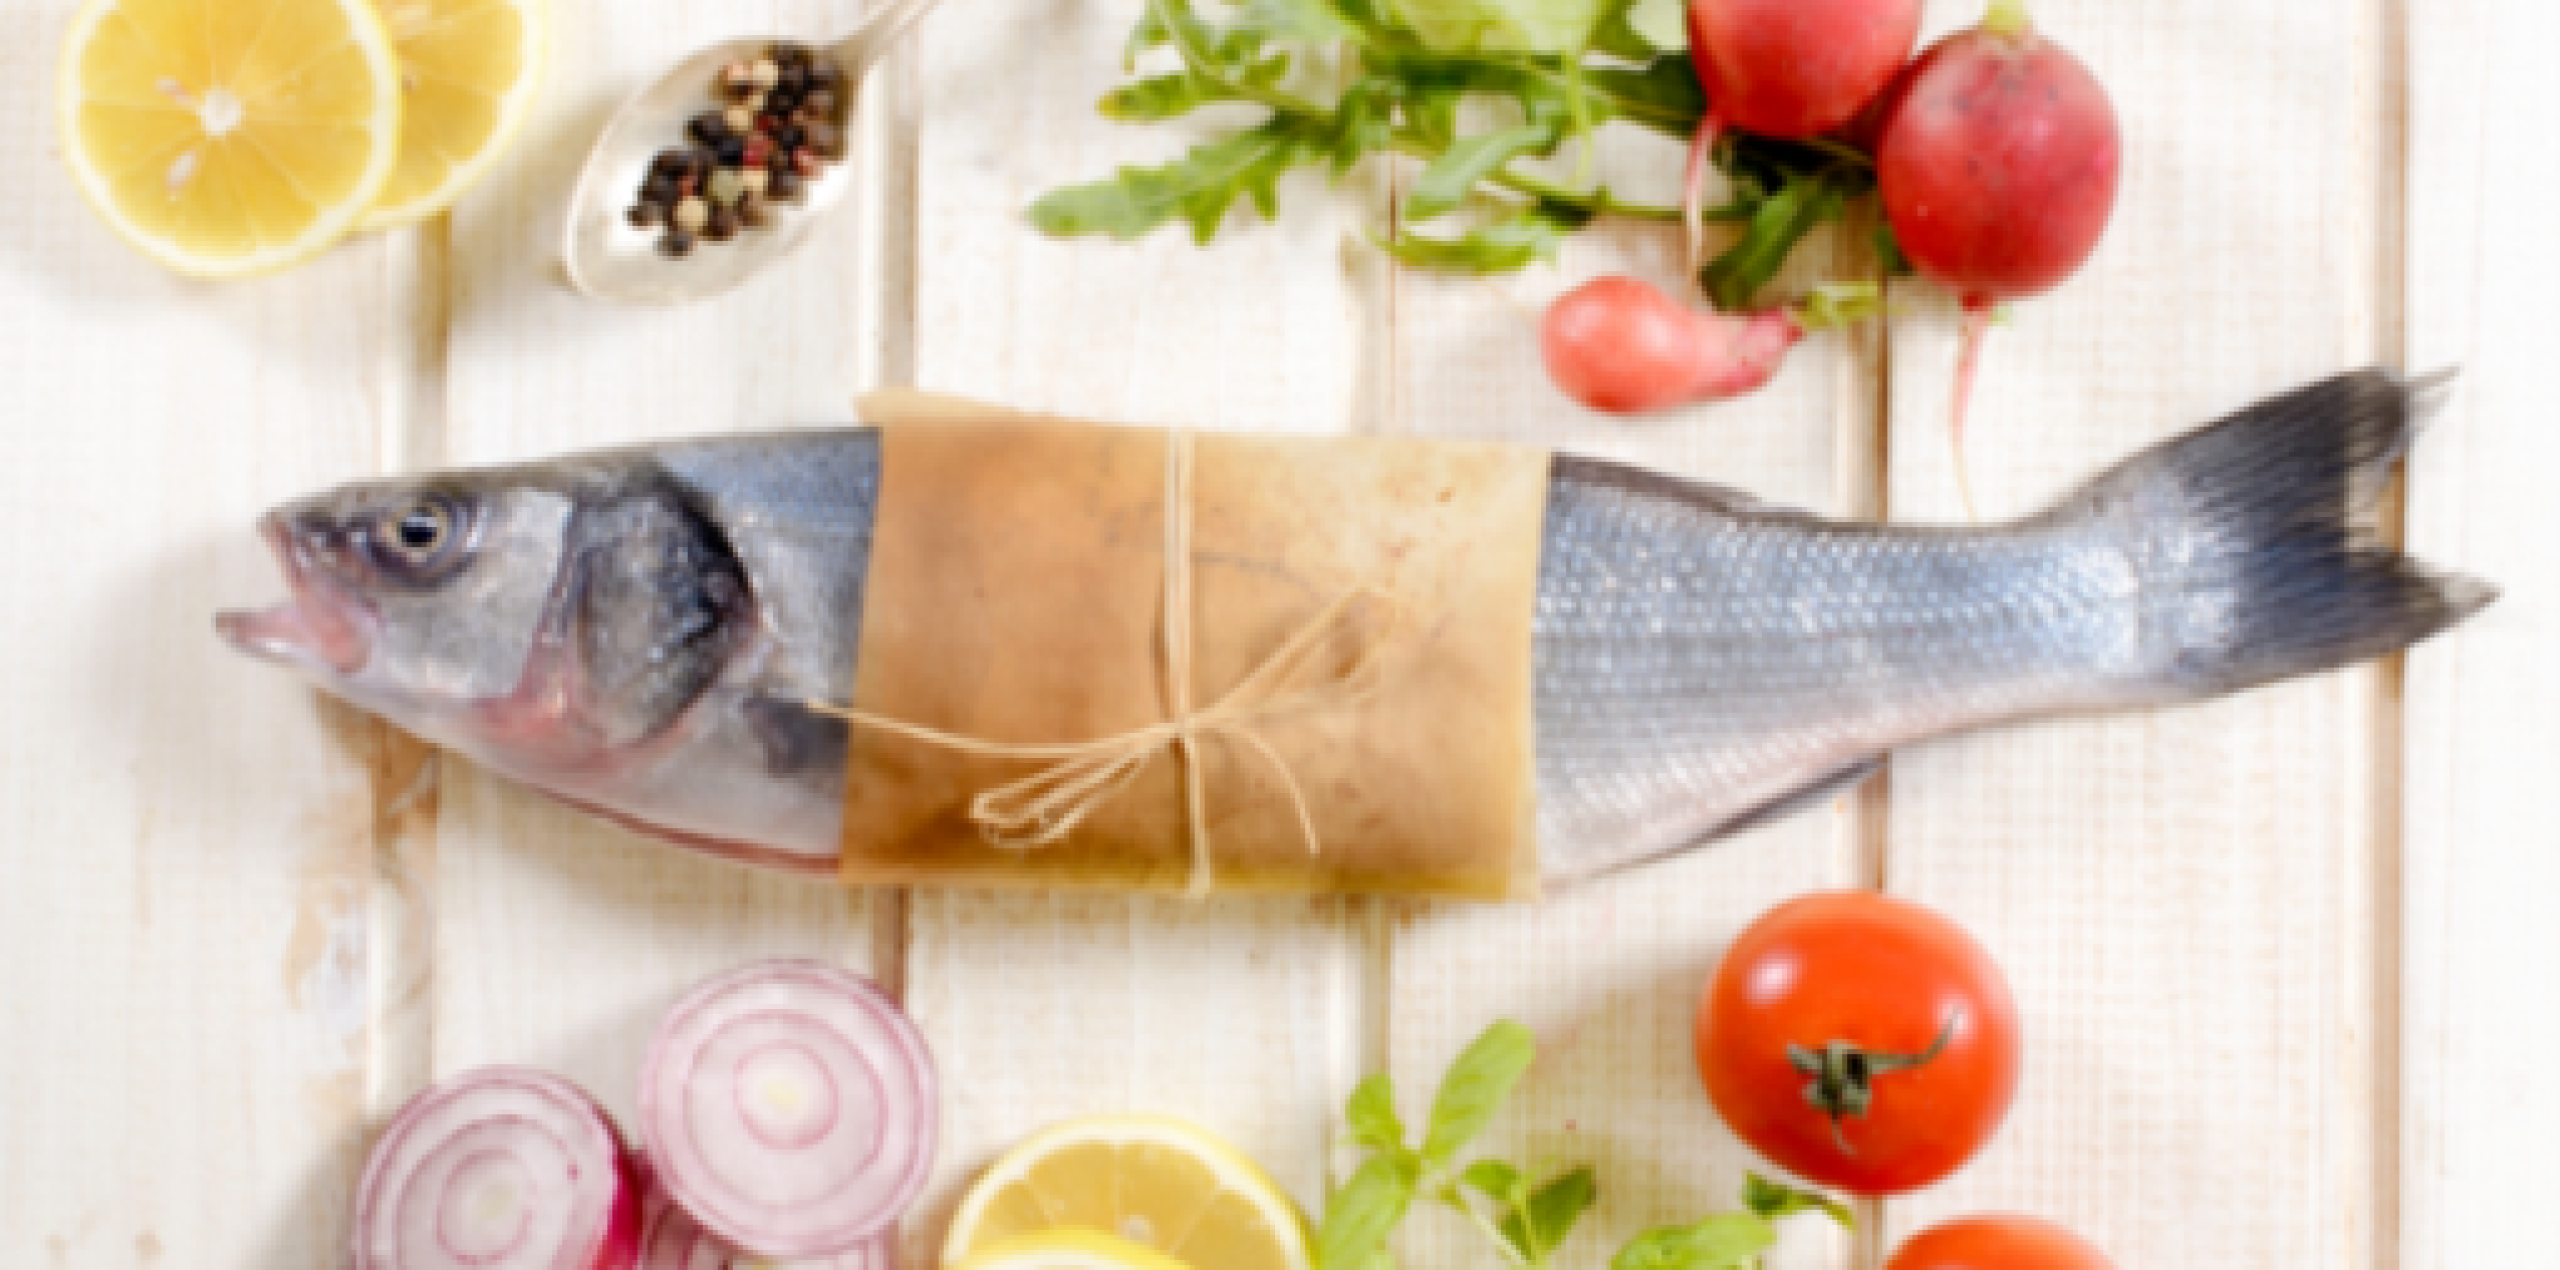 Omega-3 fatty acids serve a crucial role in our overall wellbeing